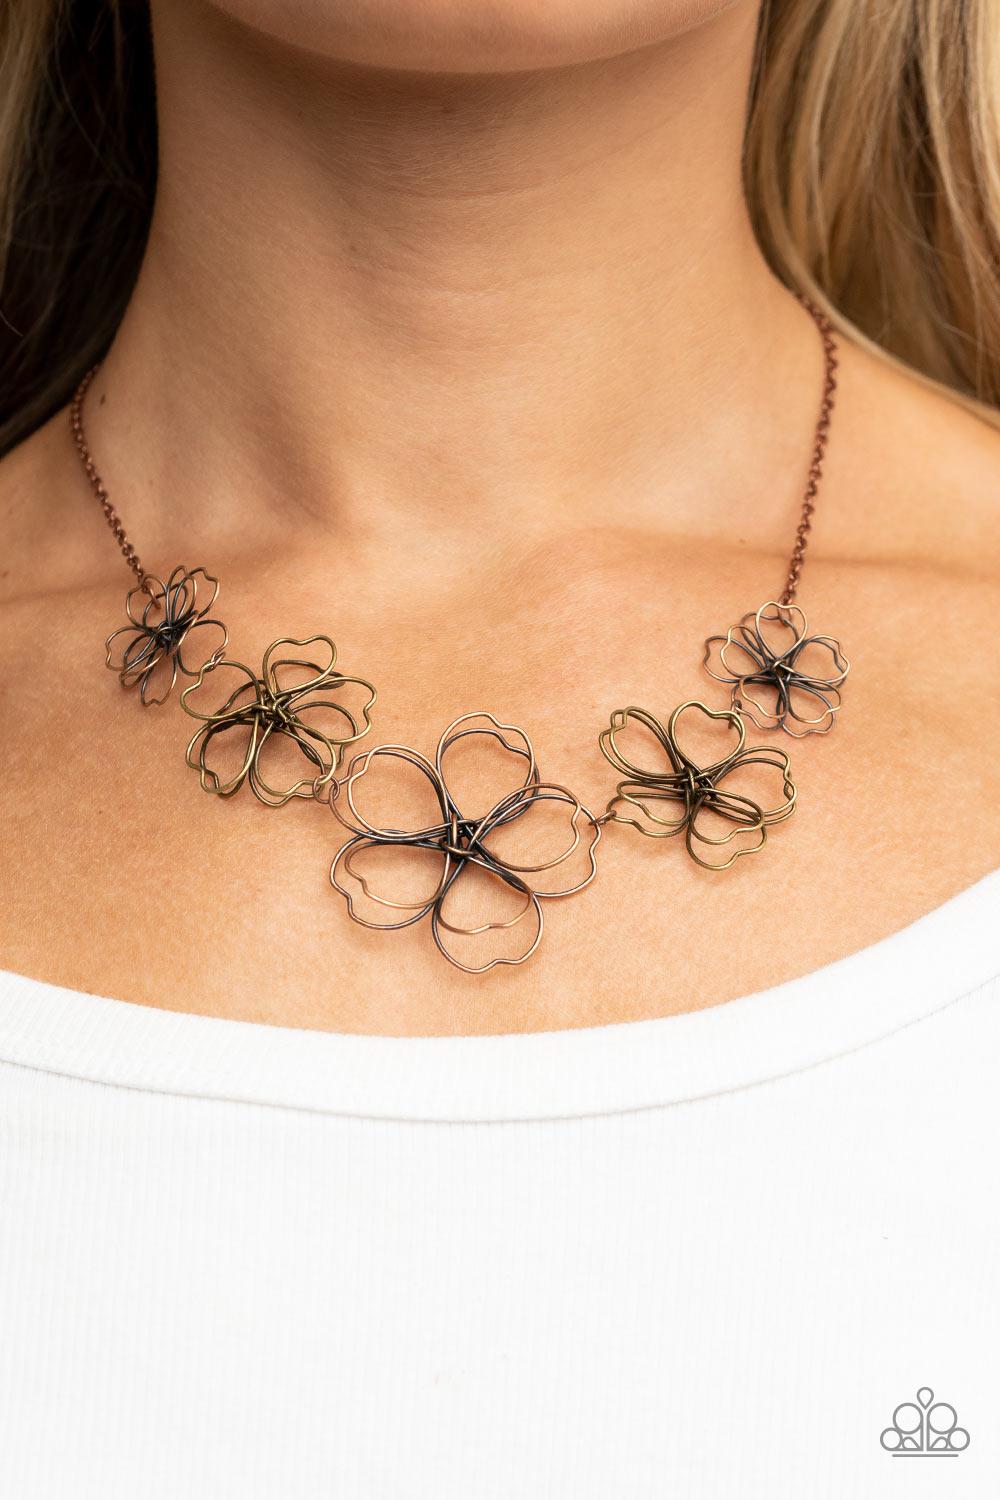 Time to GROW Copper Wire Flower Necklace-on model - CarasShop.com - $5 Jewelry by Cara Jewels